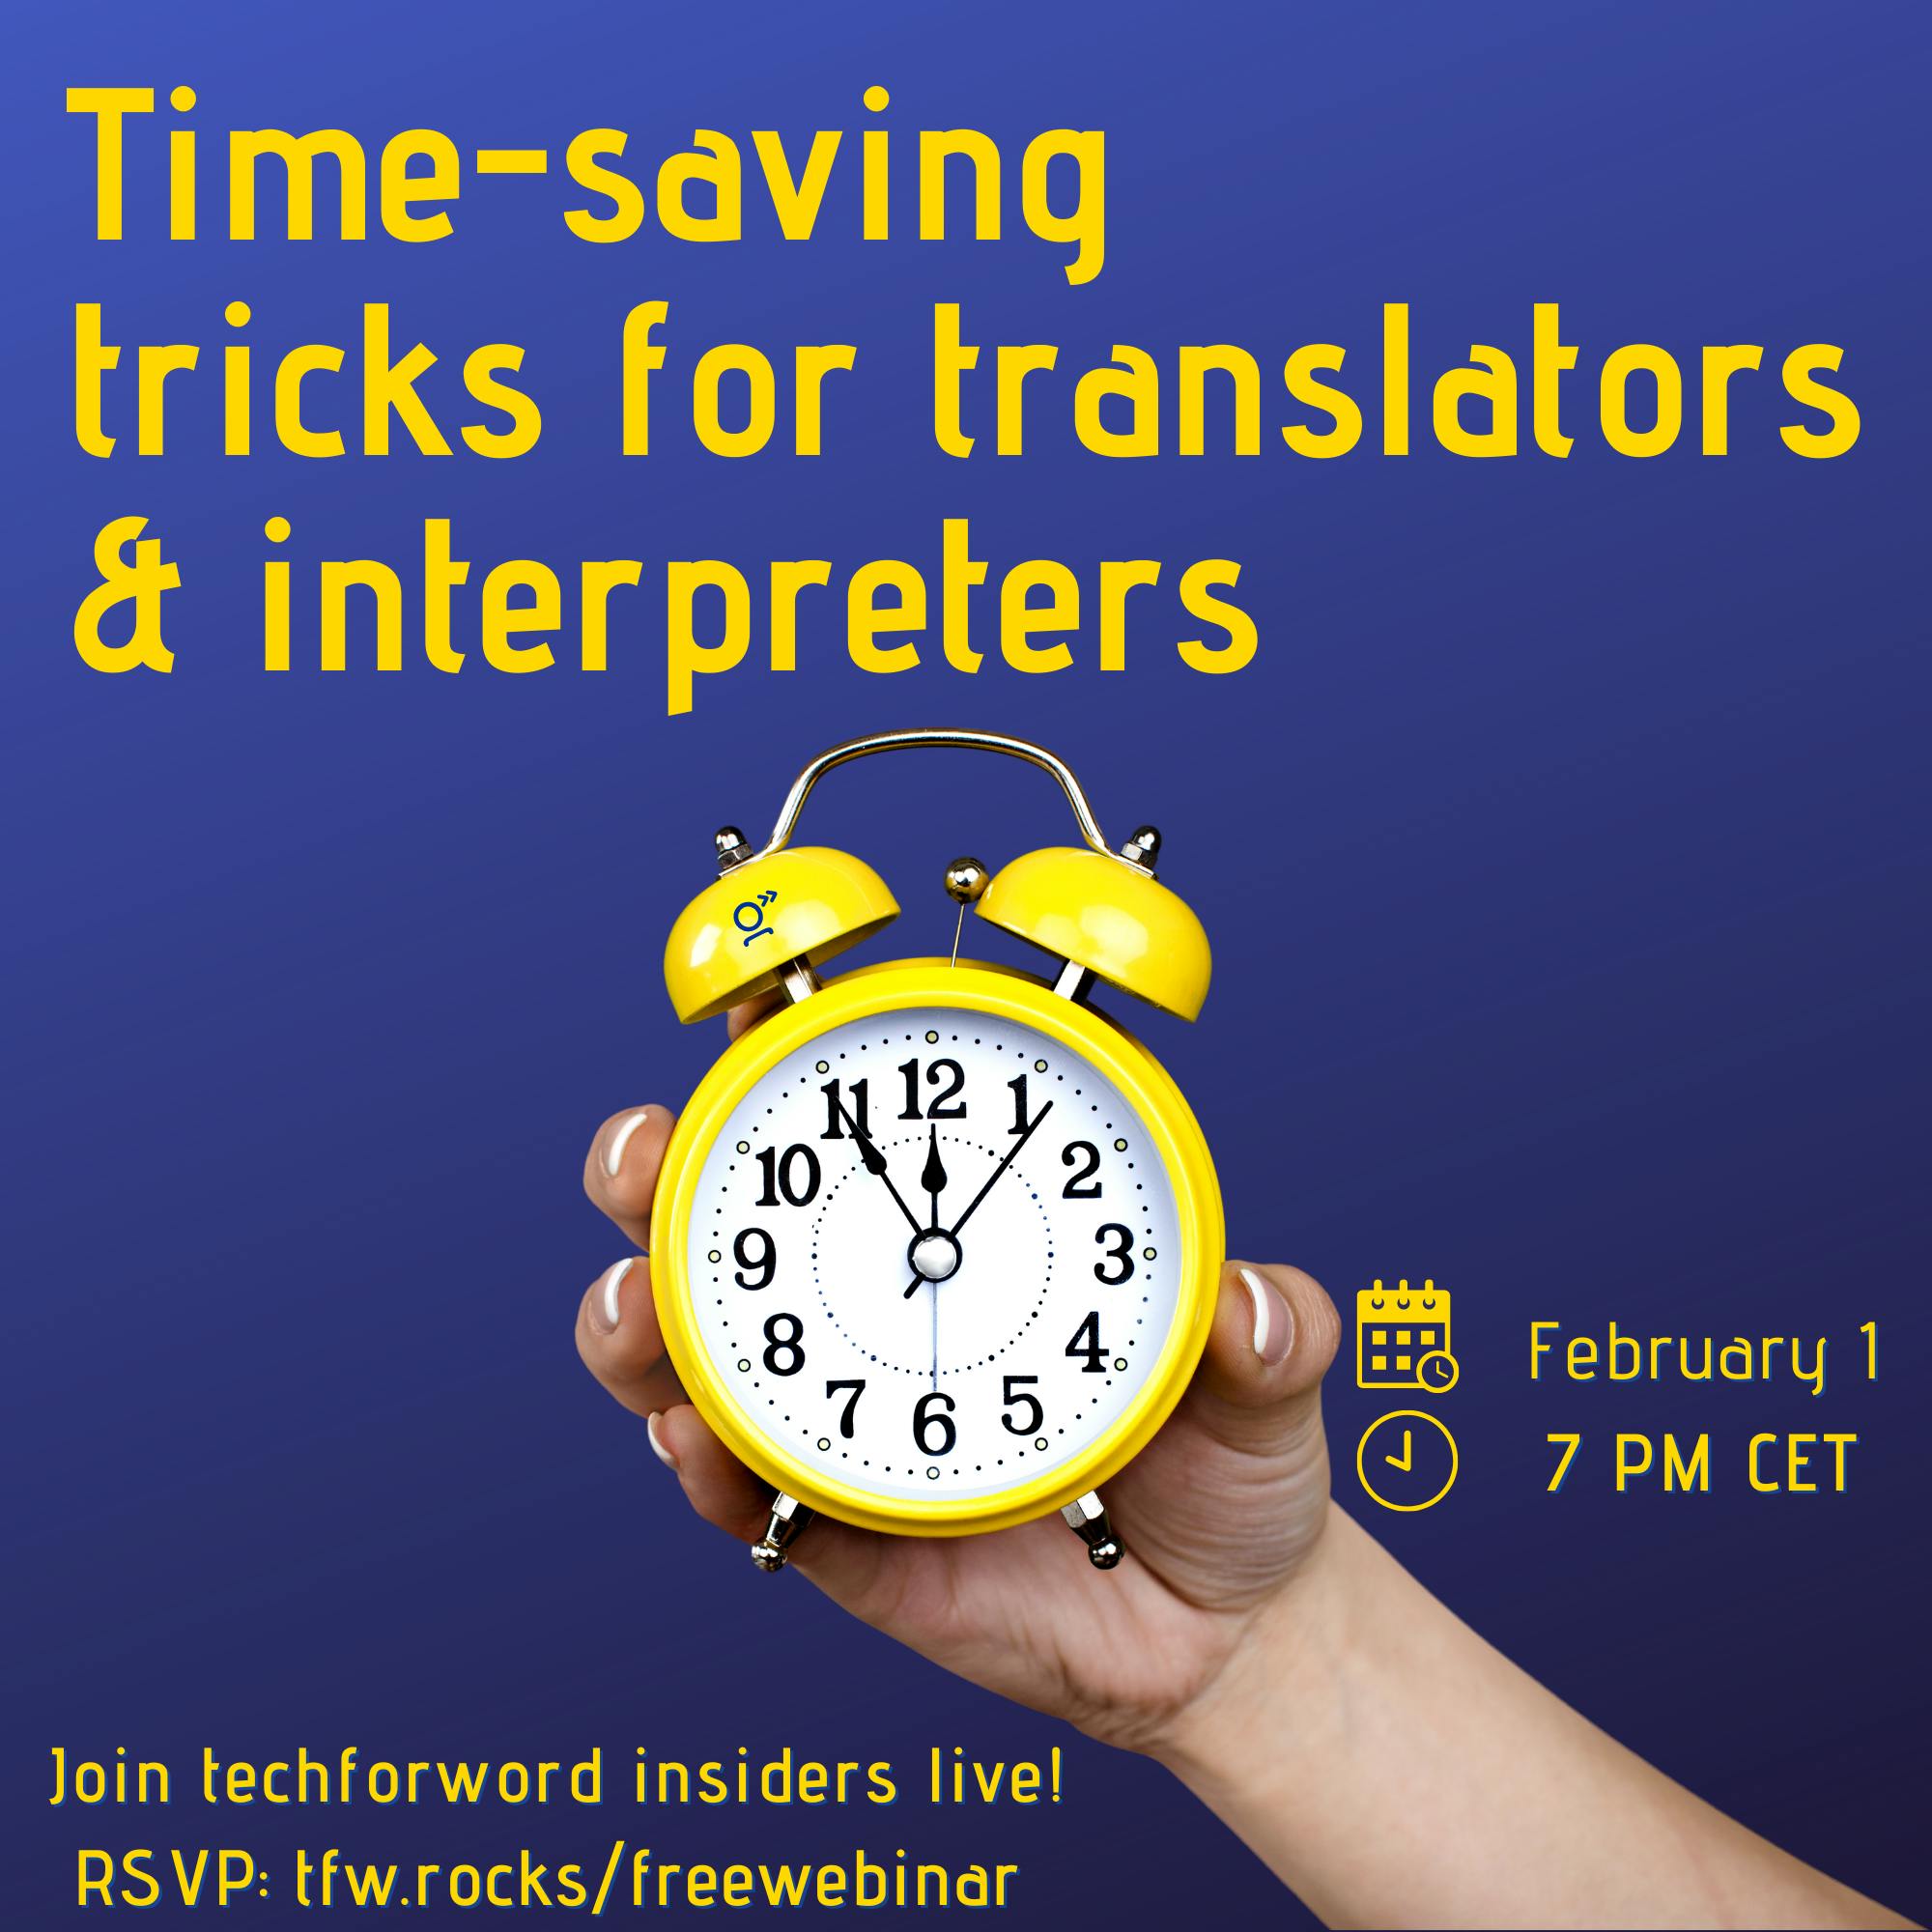 Image of film clacker with text "Time-saving tricks for translators and interpreters"